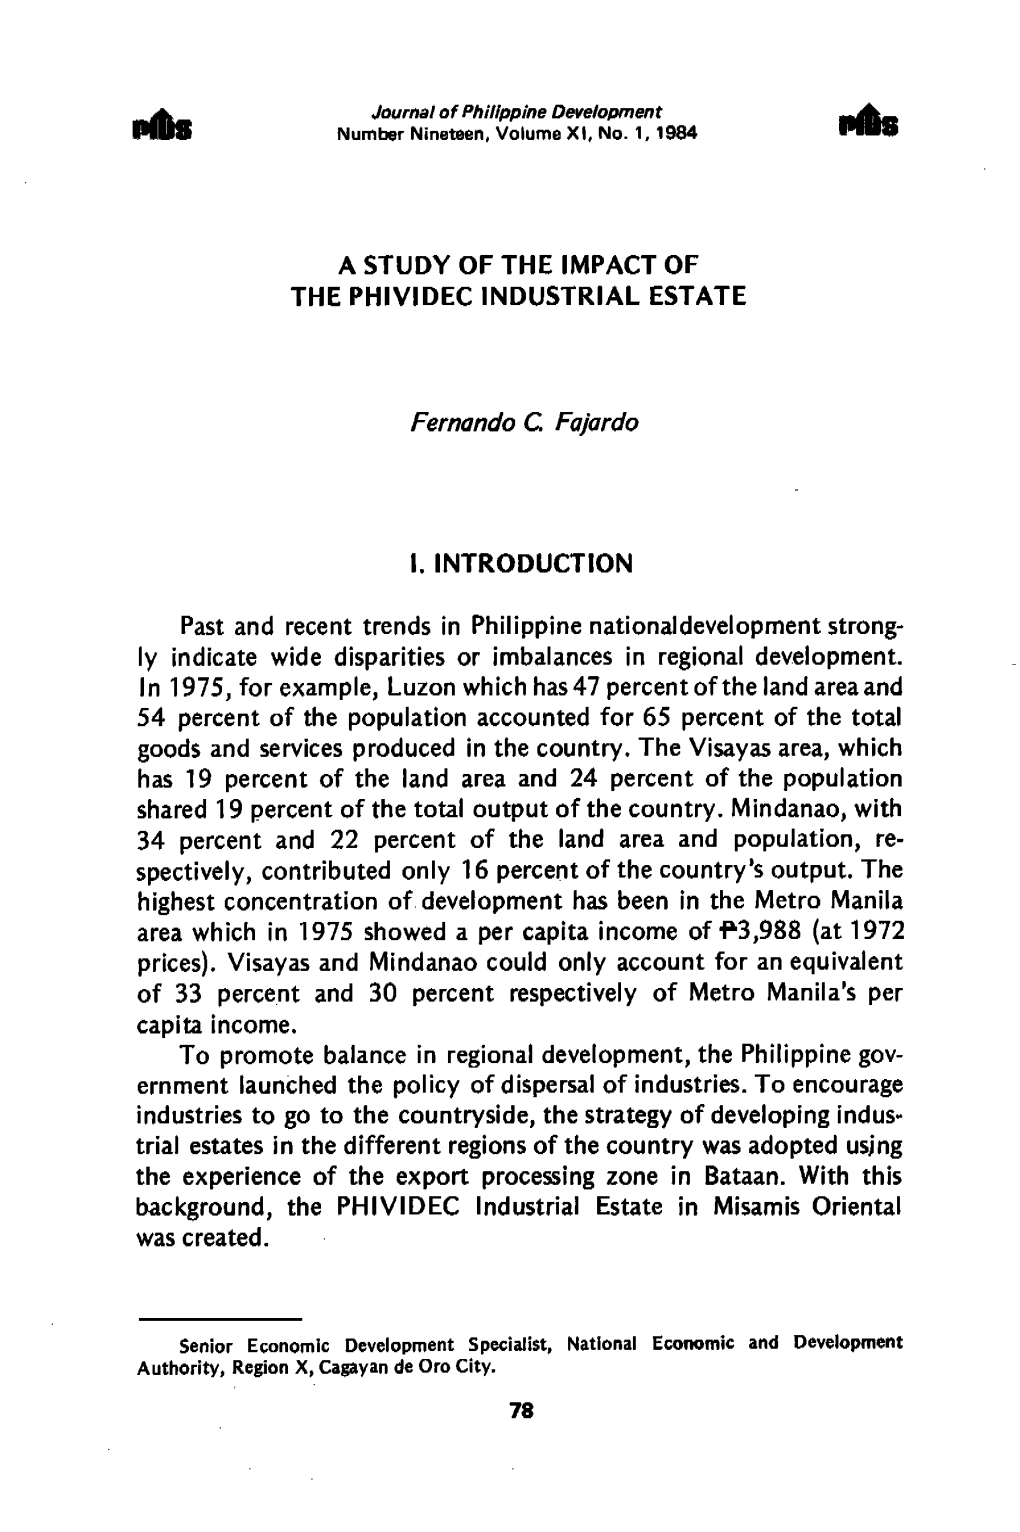 A Study of the Impact of the Phividec Industrial Estate